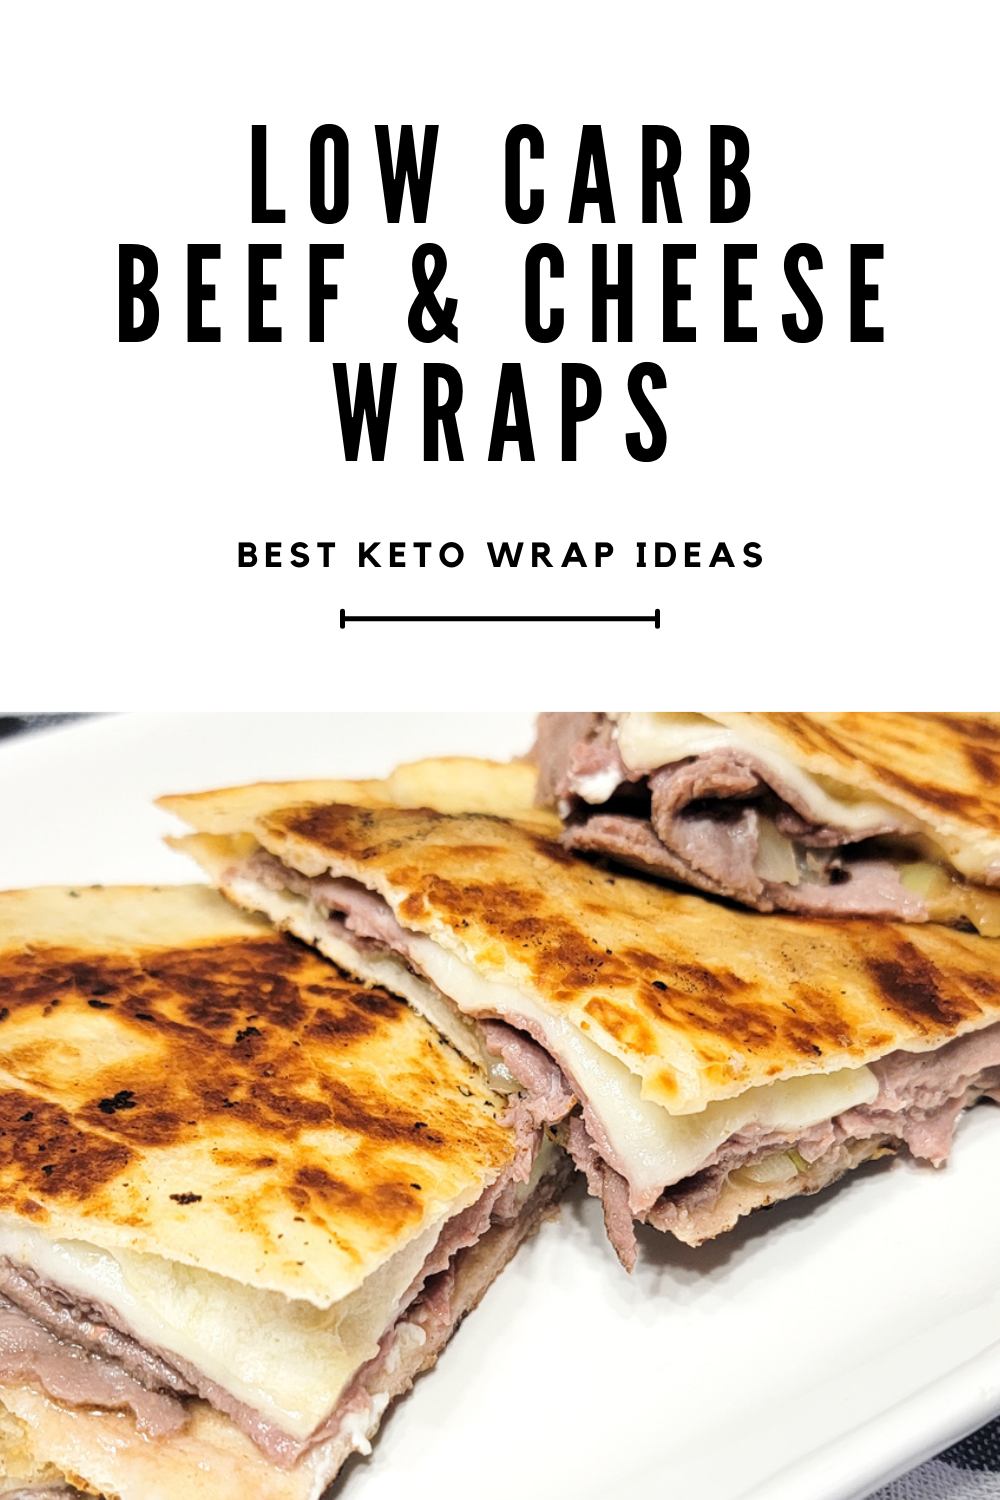 Keto wrap Ideas infographic with beef and cheese melt. 